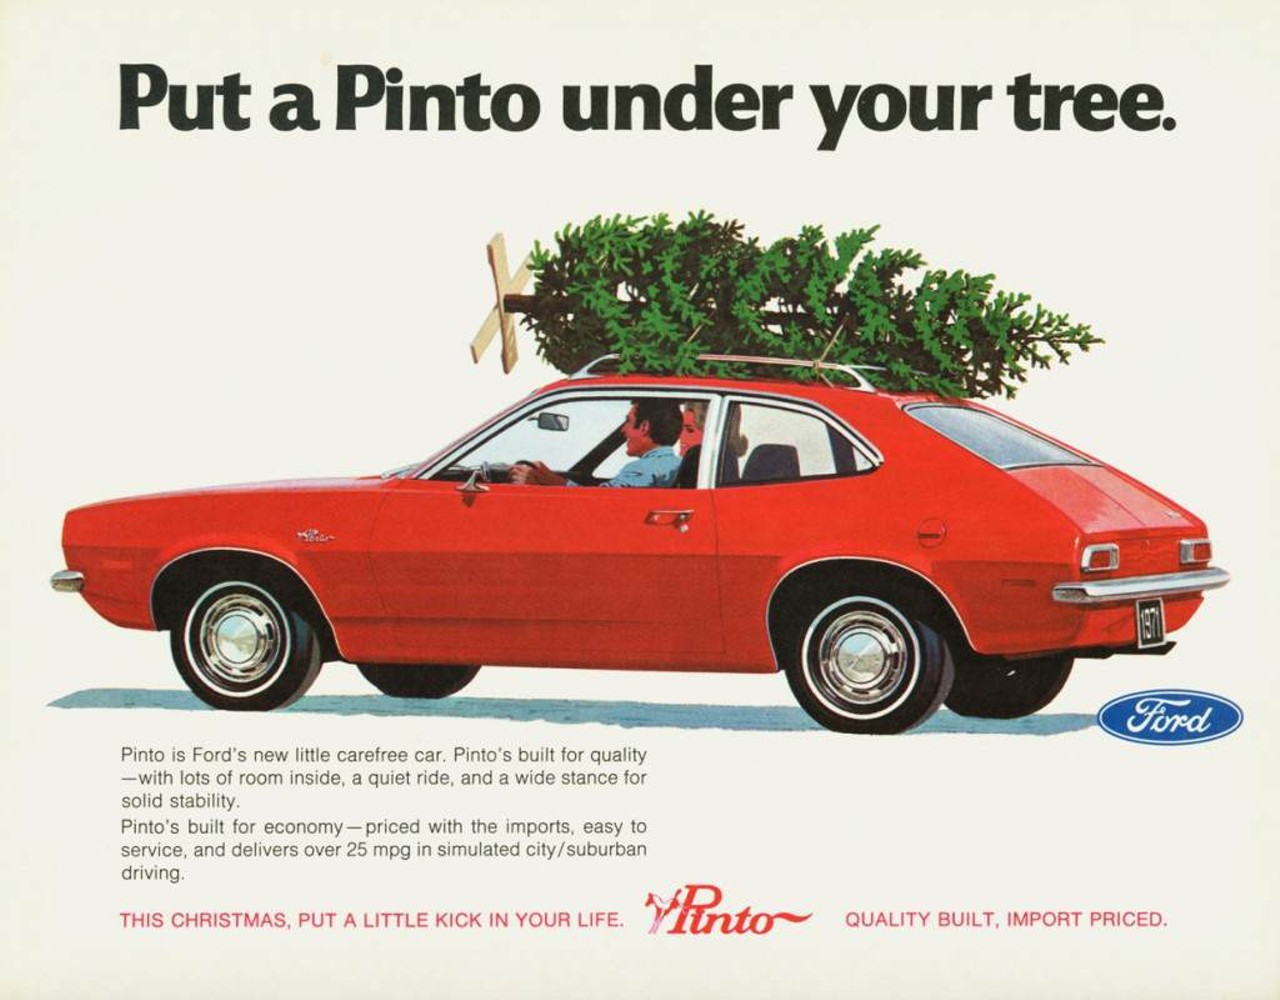 Ford Pinto holiday ad, 1971